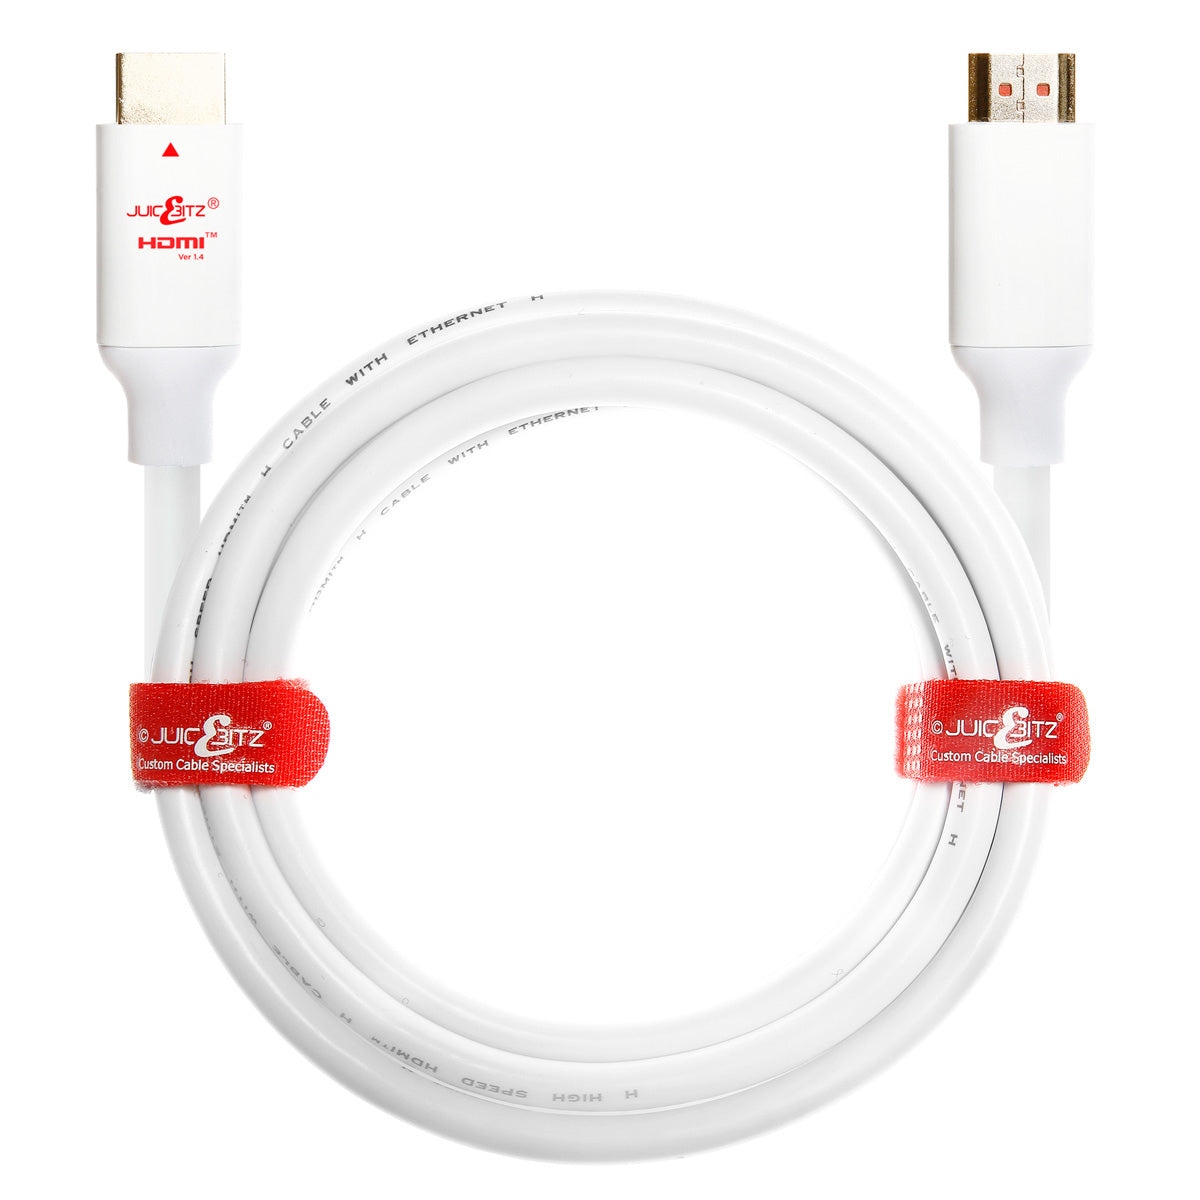 HDMI 1.4 Full HD HDMI Cable with Ethernet, CEC, ARC - White